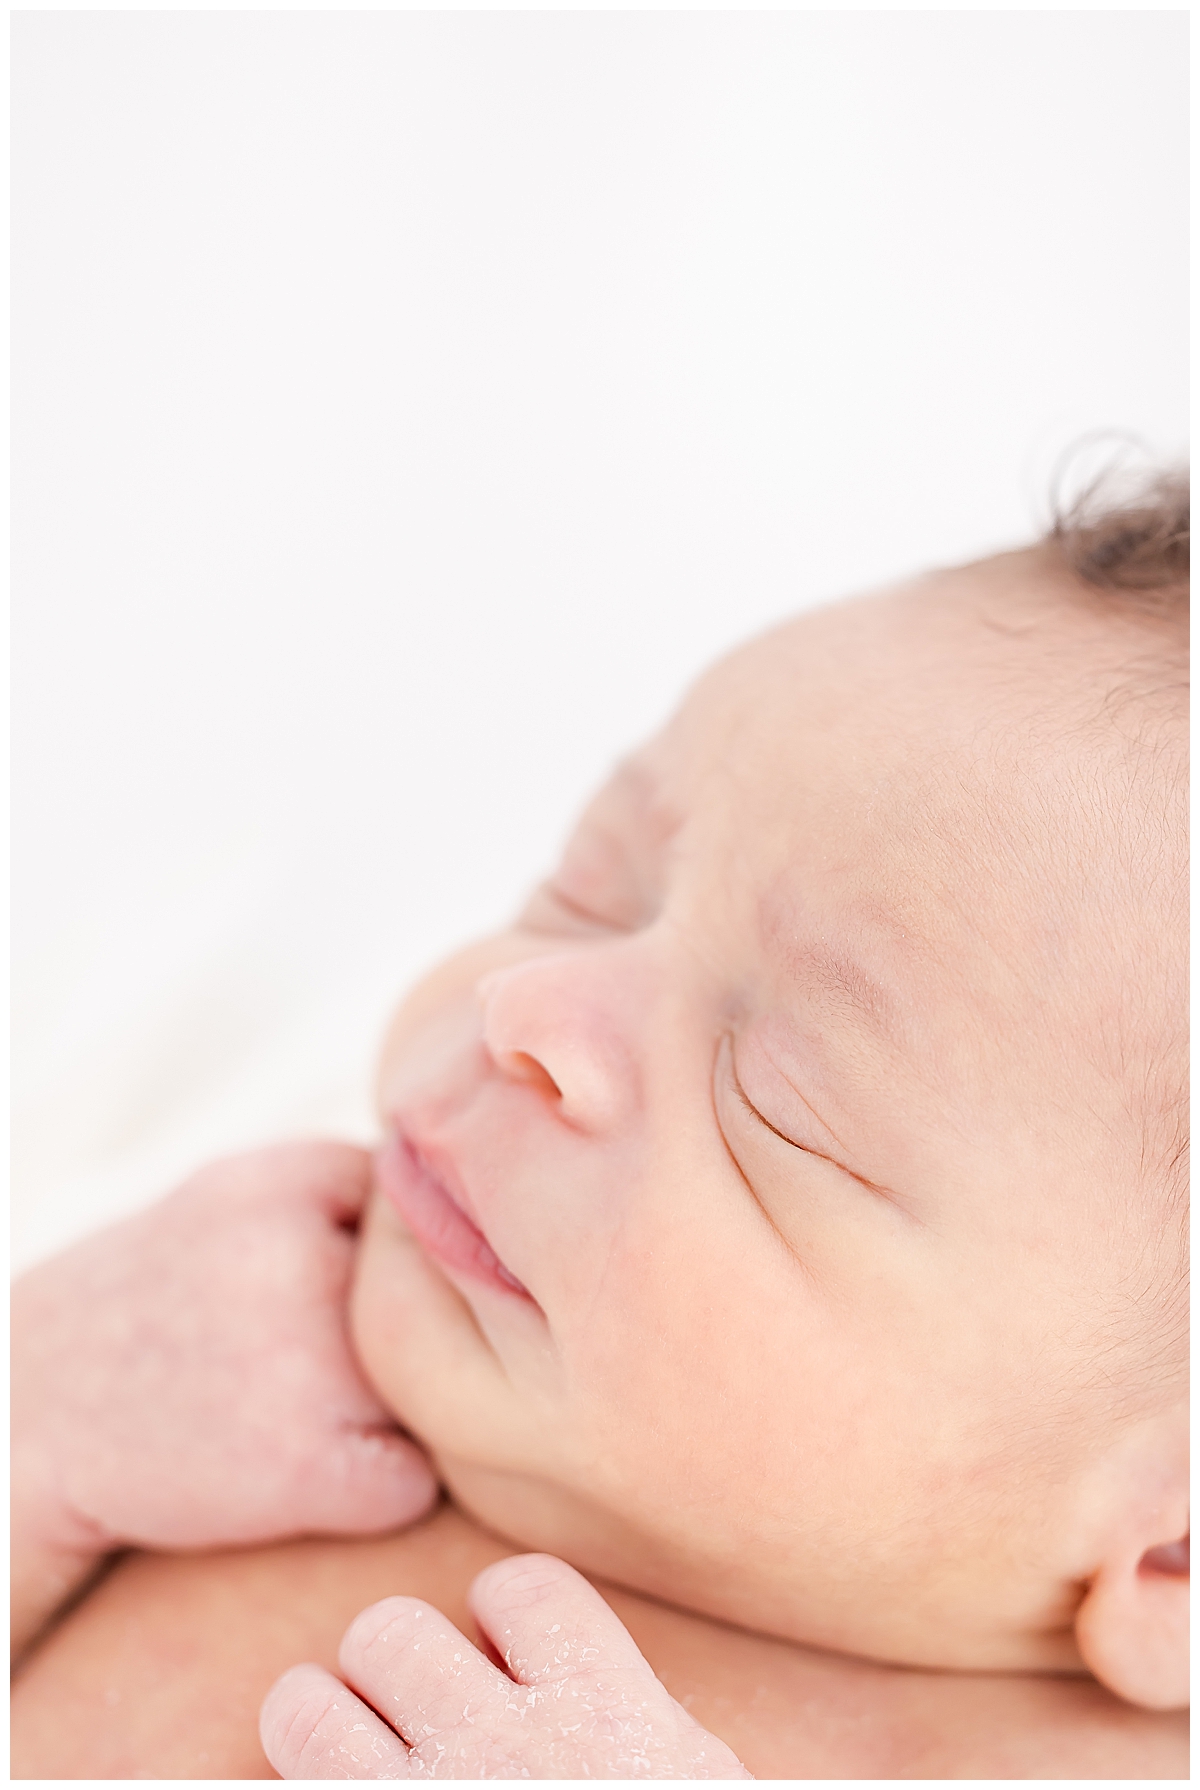 Newborn wrapped in white swaddle with close up of face details